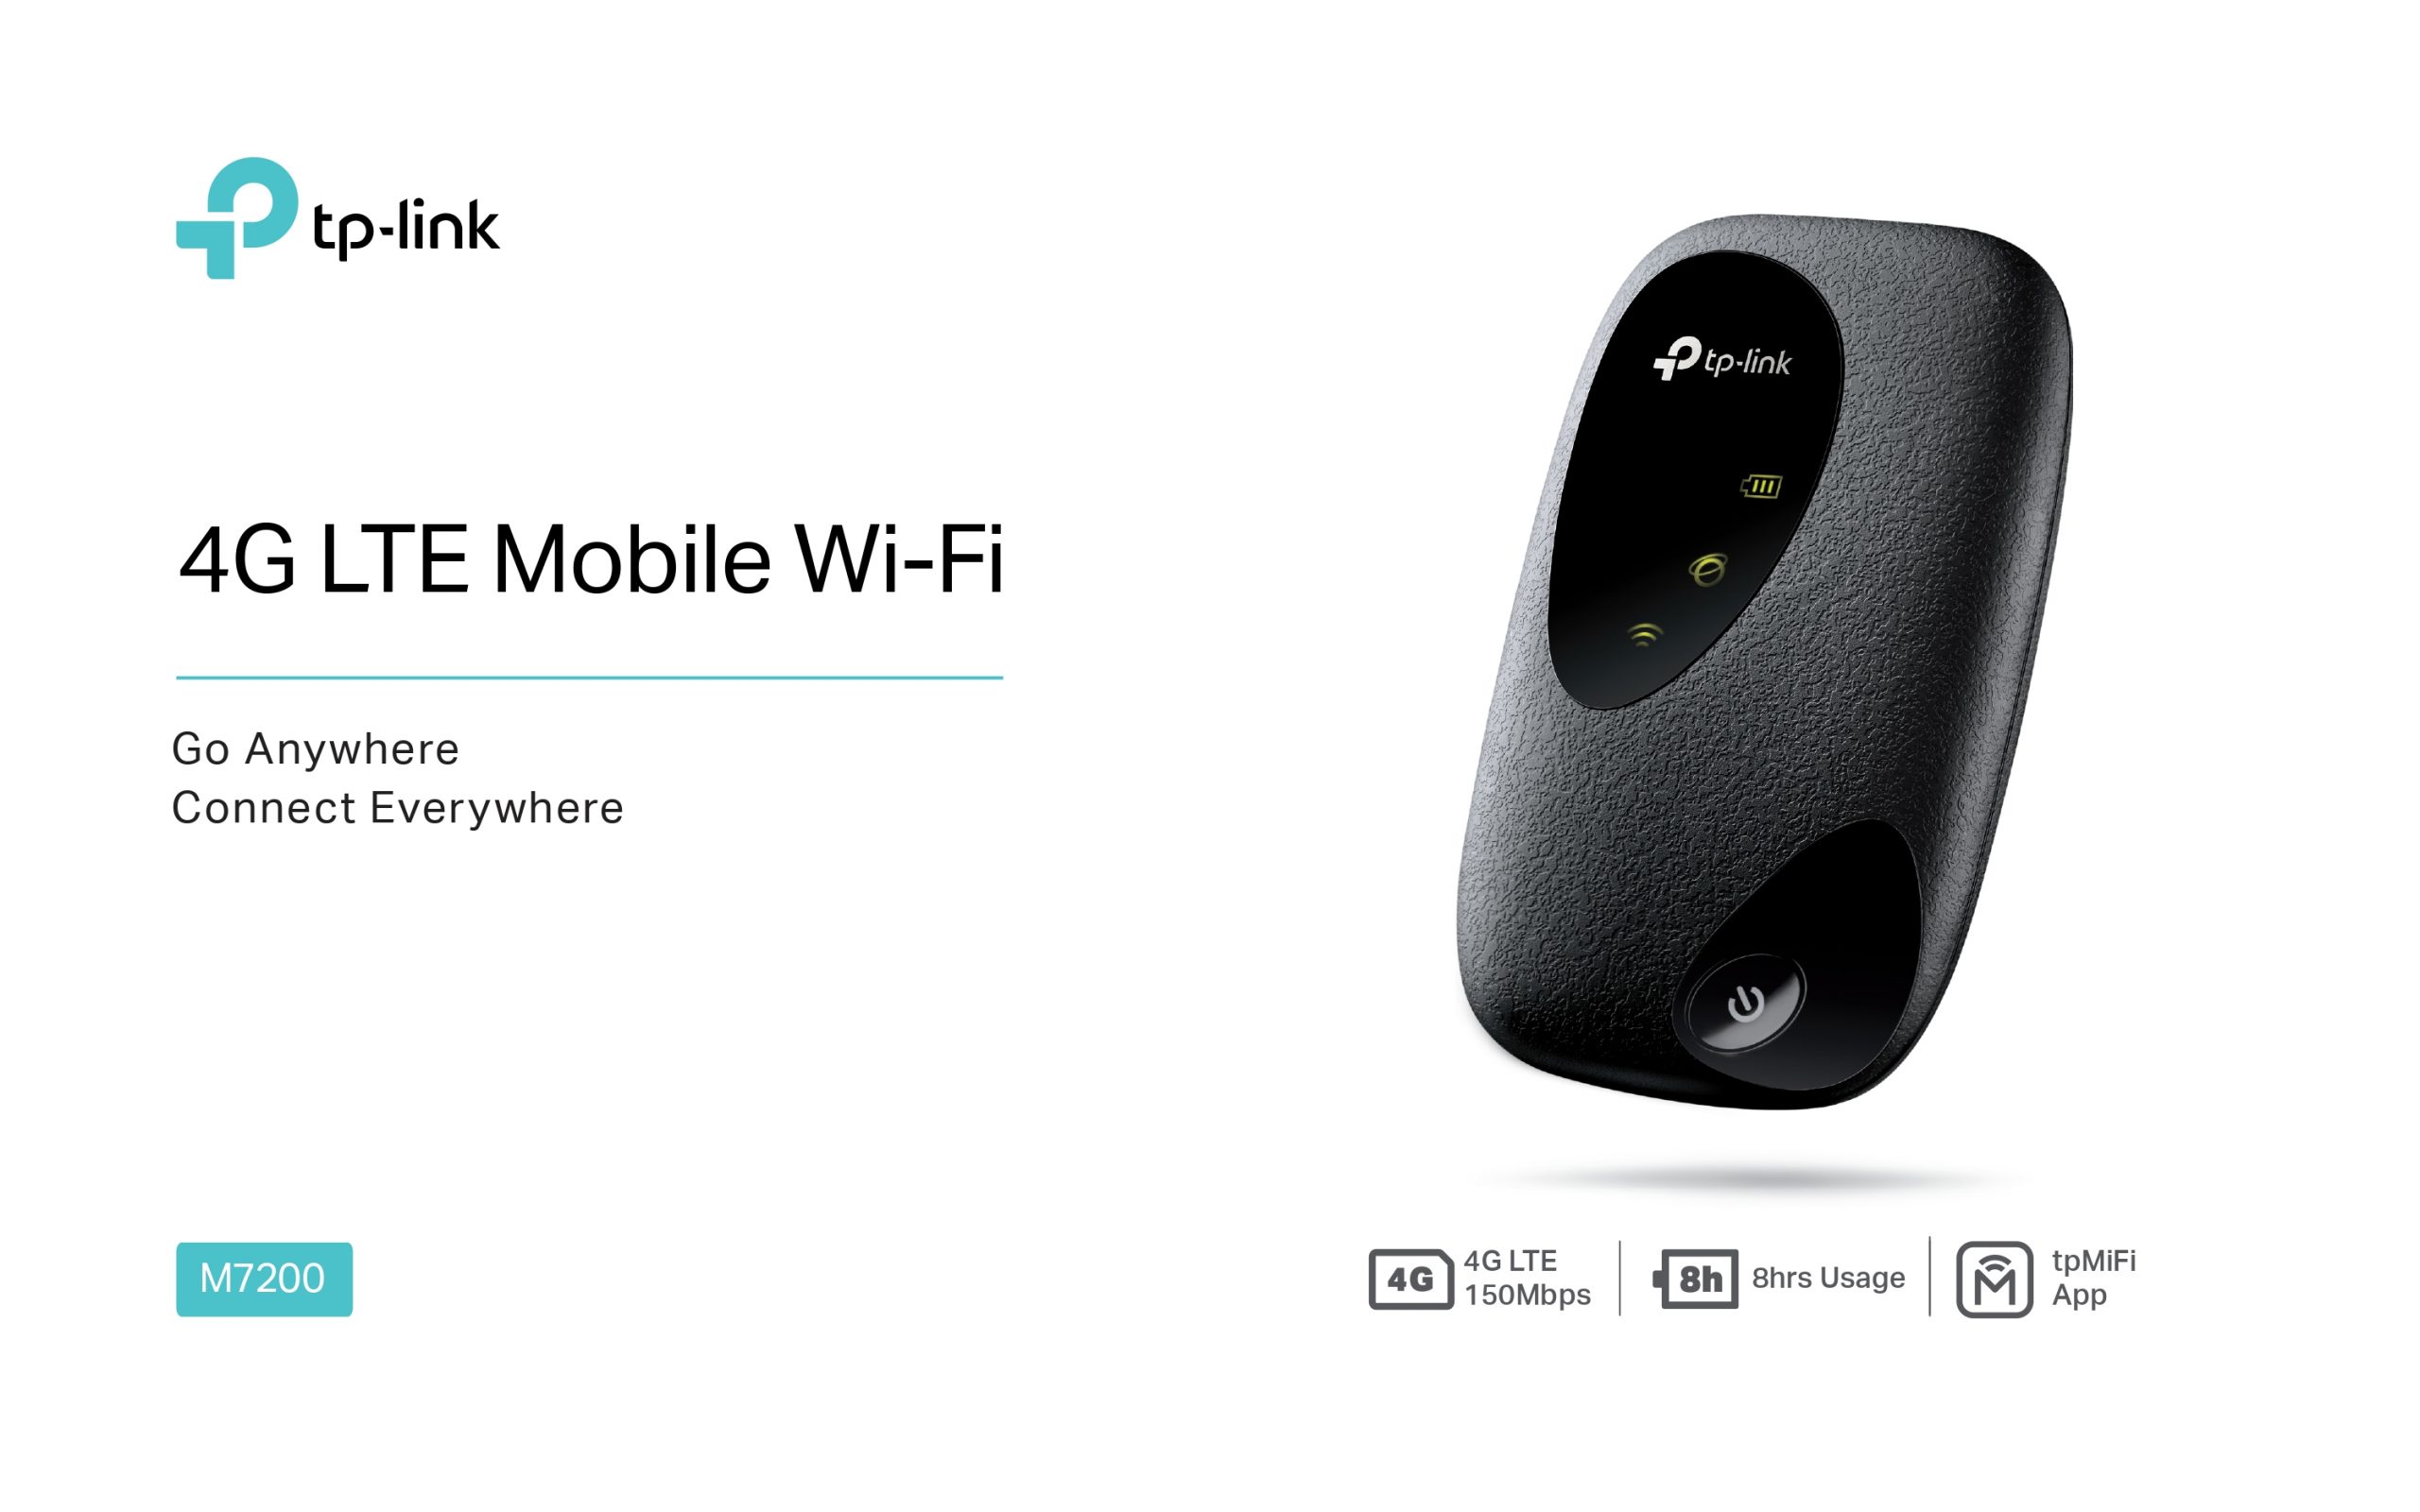 TP-LINK 4G LTE Mobile Wi-Fi (M7200) - The source for WiFi products